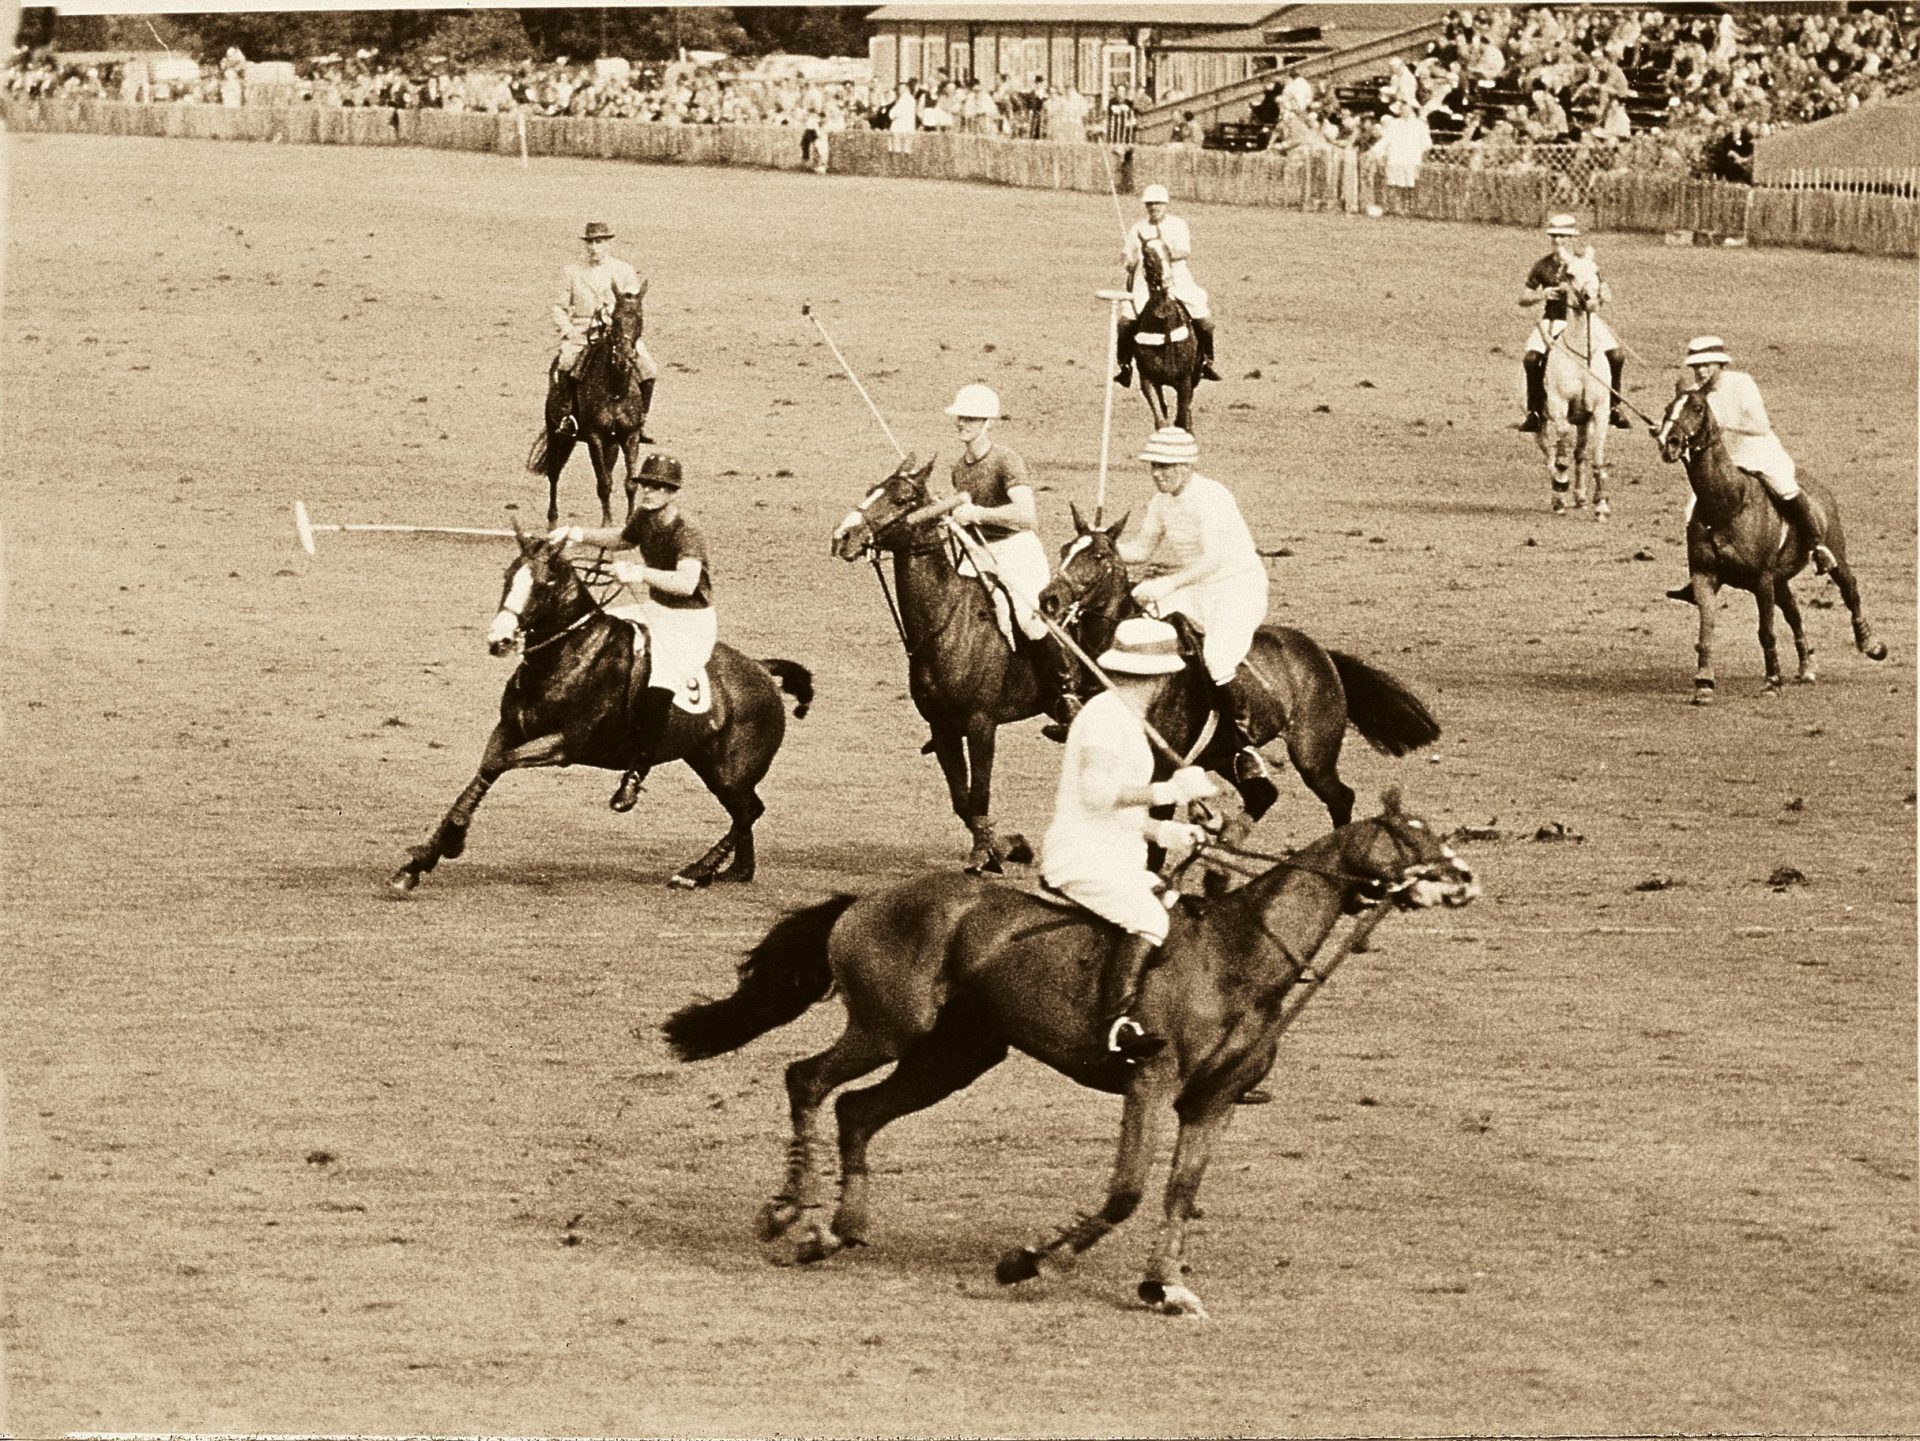 B&W image of a polo match in Jaipur from the 1930s in The Flippin’ History of the Reverso for A Collected Man